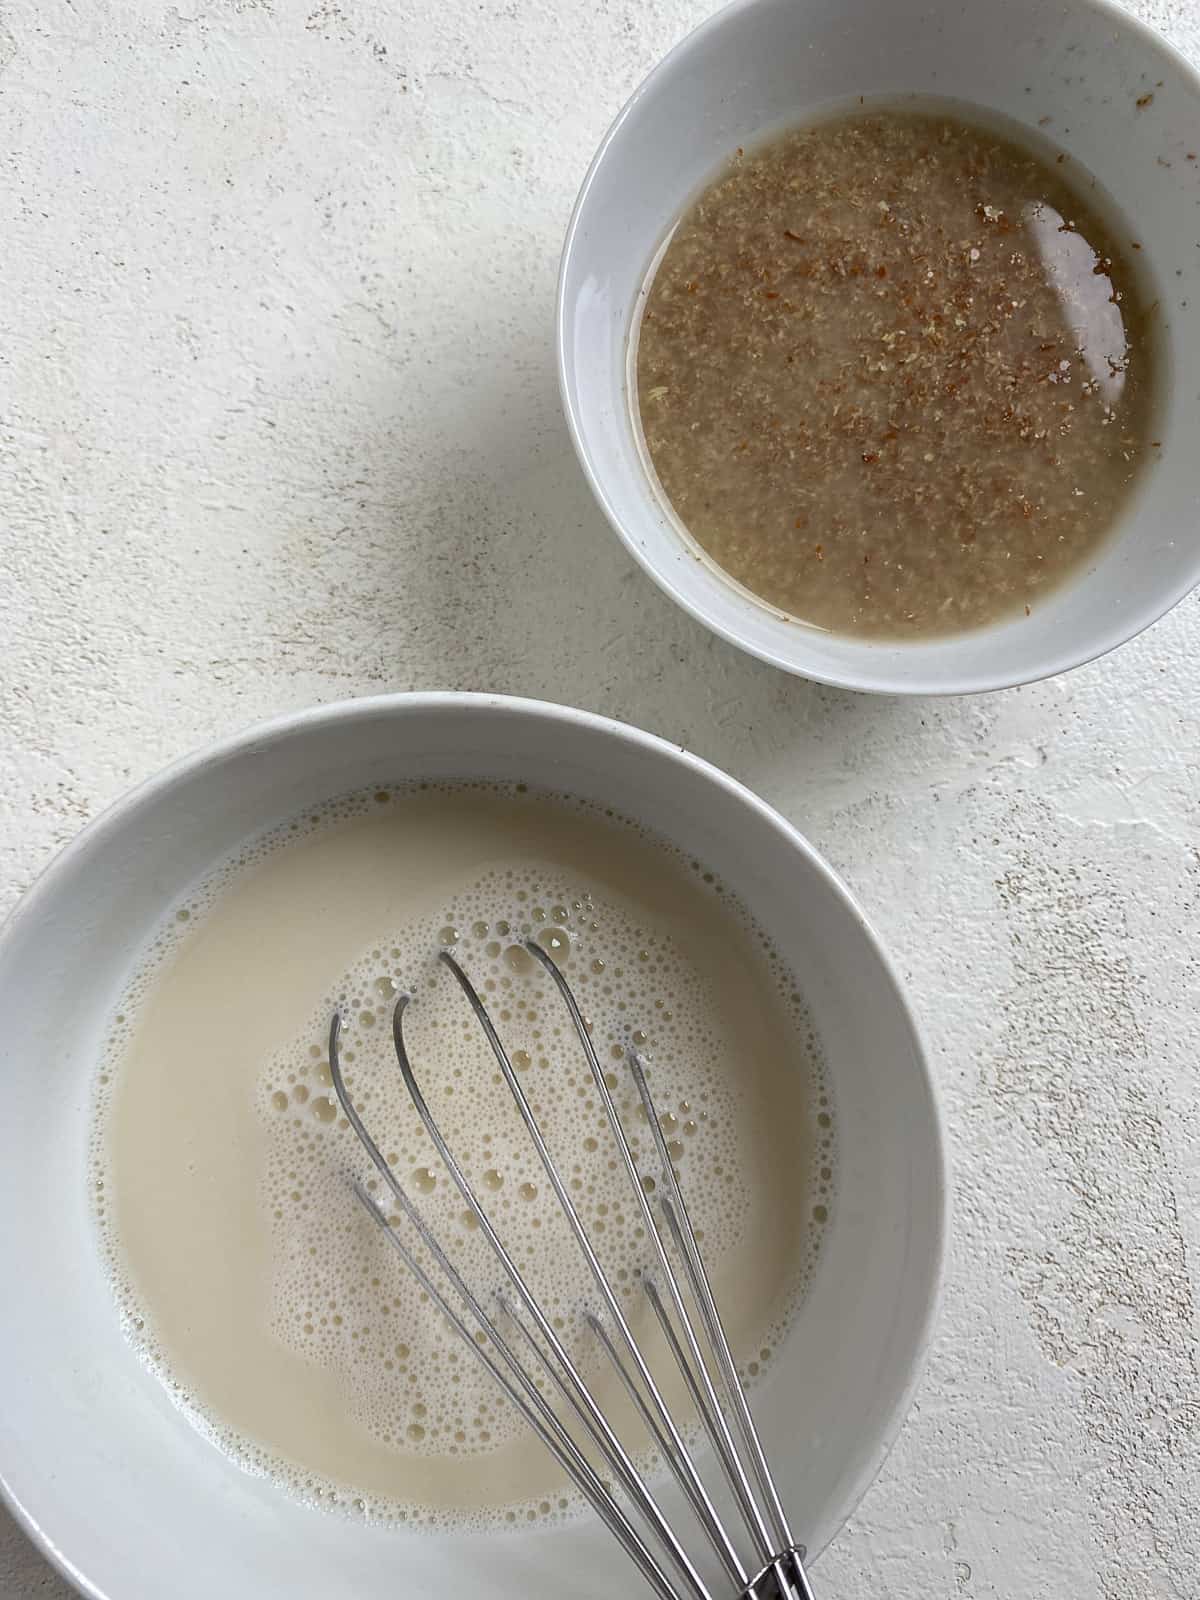 flaxseed mixture and sugar mixture in a bowl alongside each other